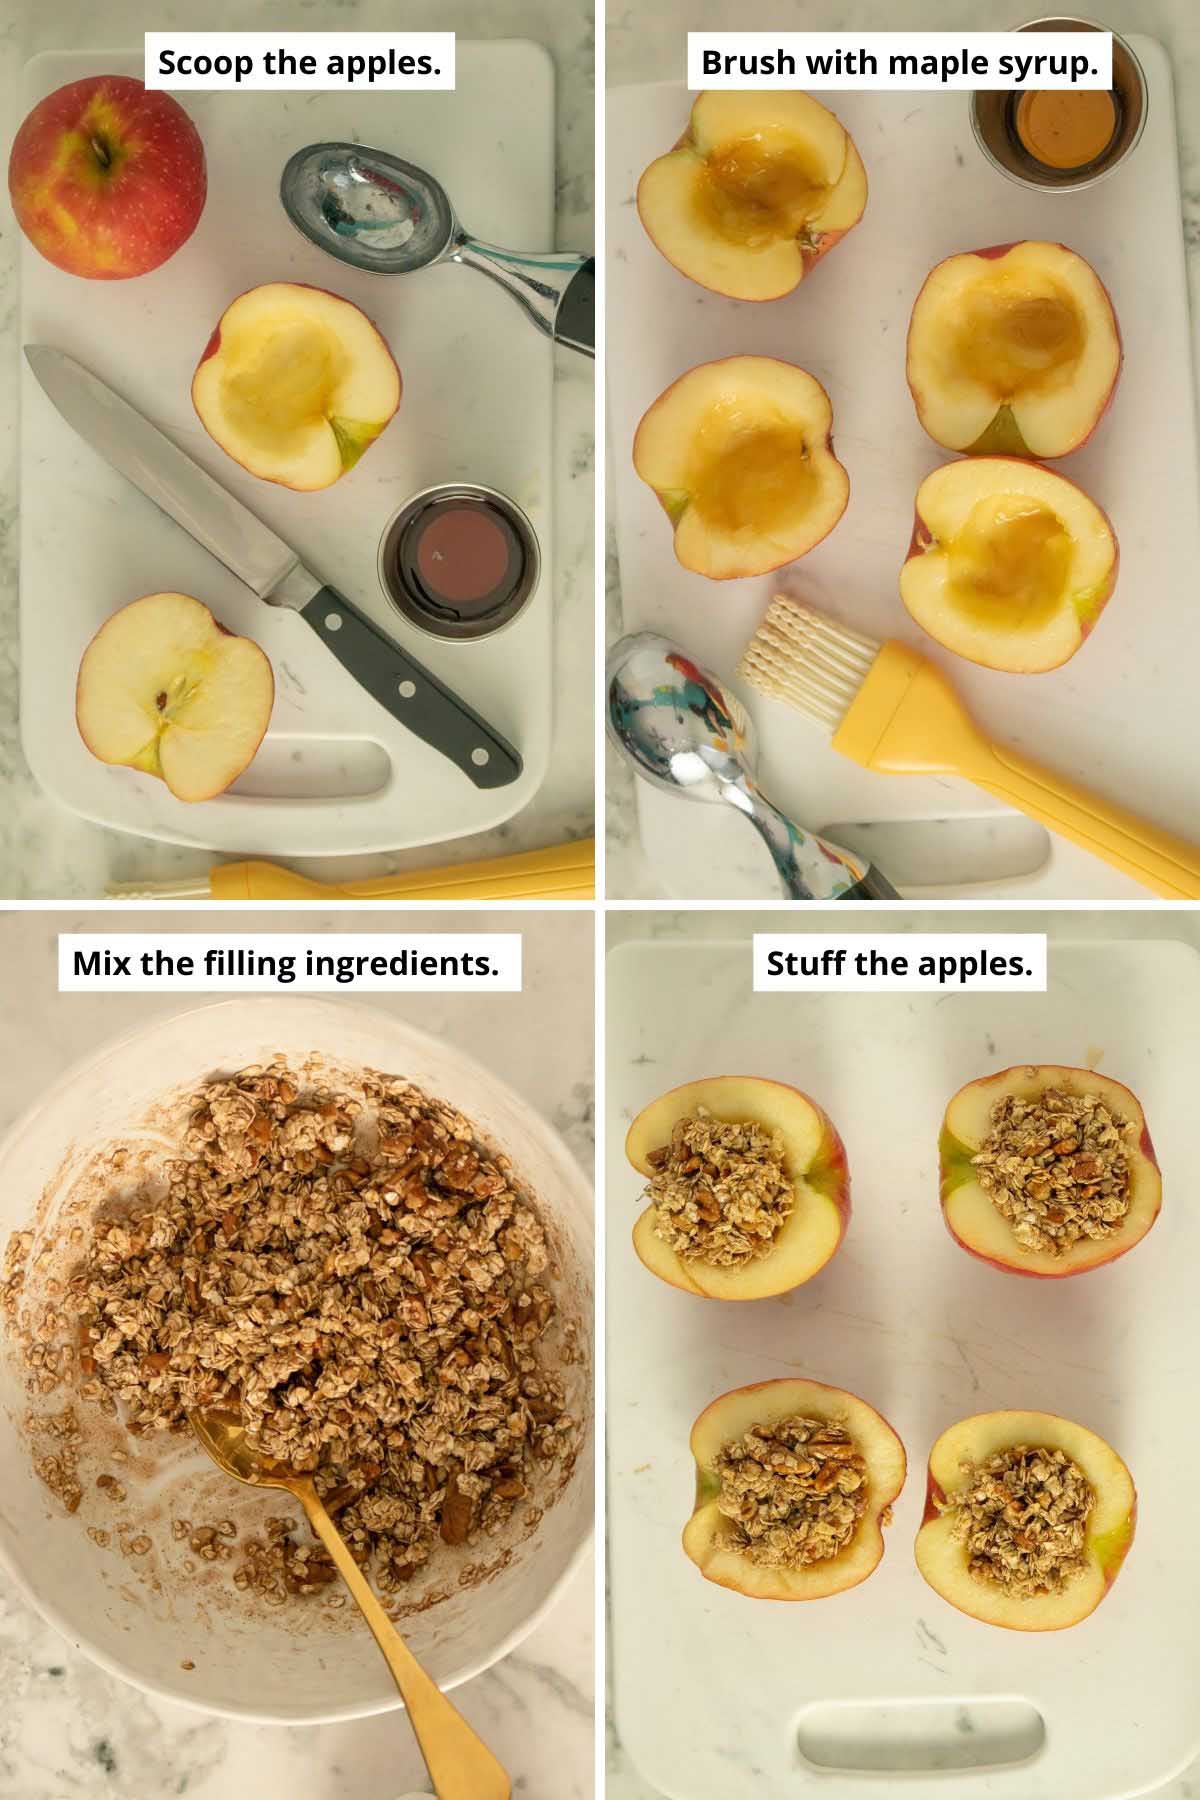 image collage showing scooping then apples, brushing them with maple syrup, the mixed filling in a bowl and the filling in the apples